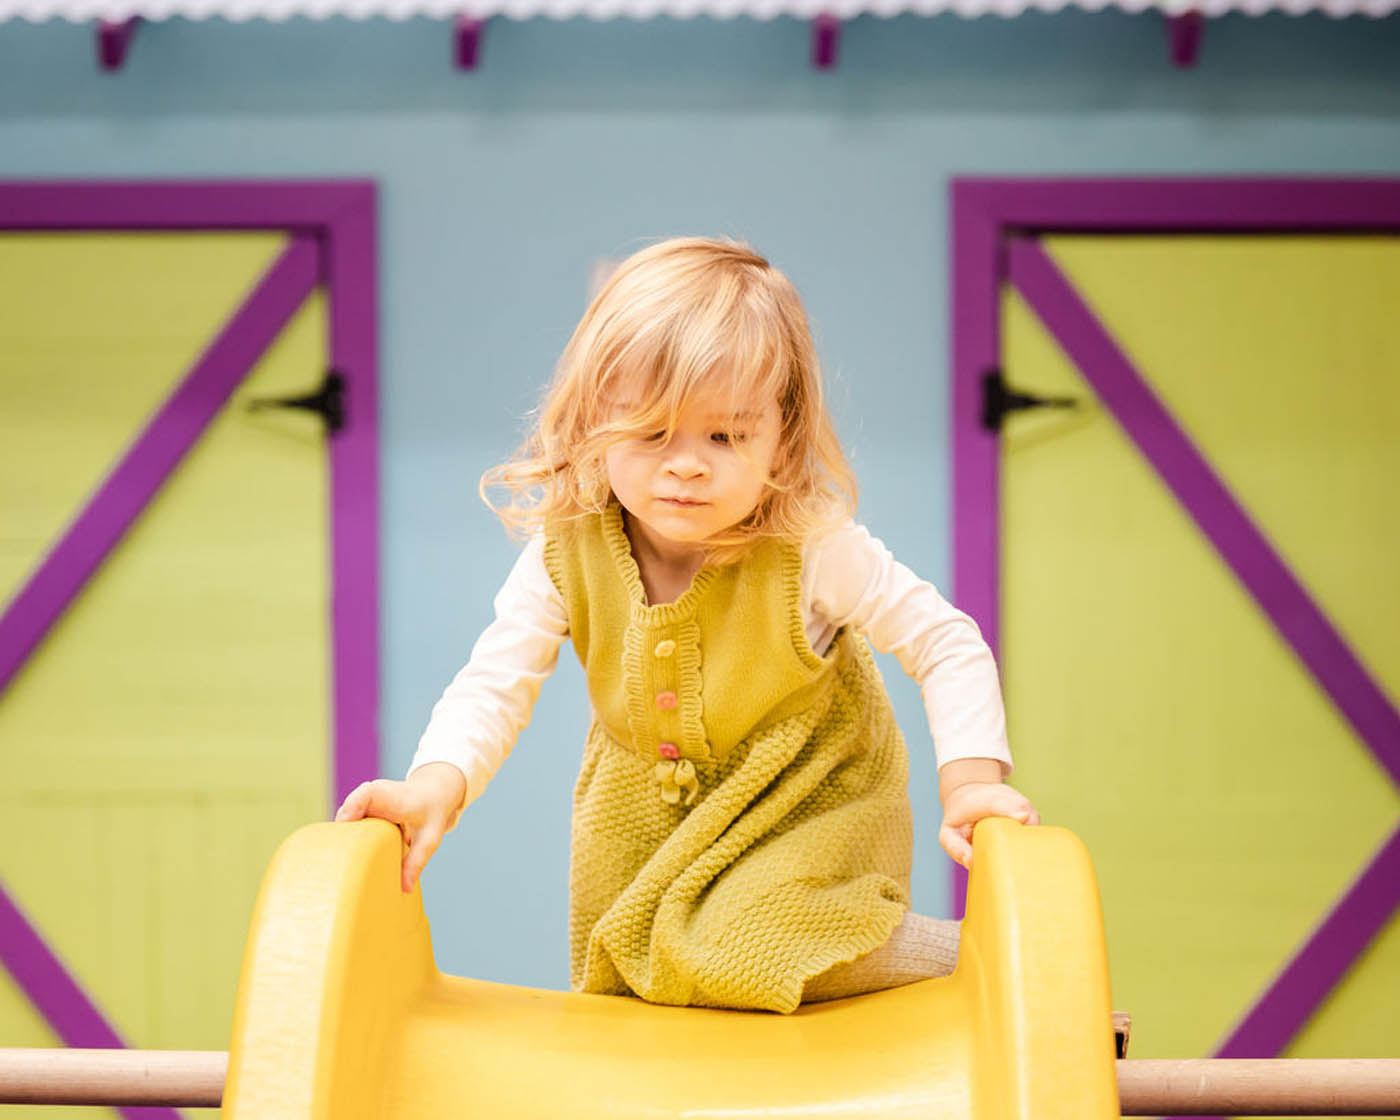 A girl climbing up a yellow slide enjoying open play in Wethersfield, CT.